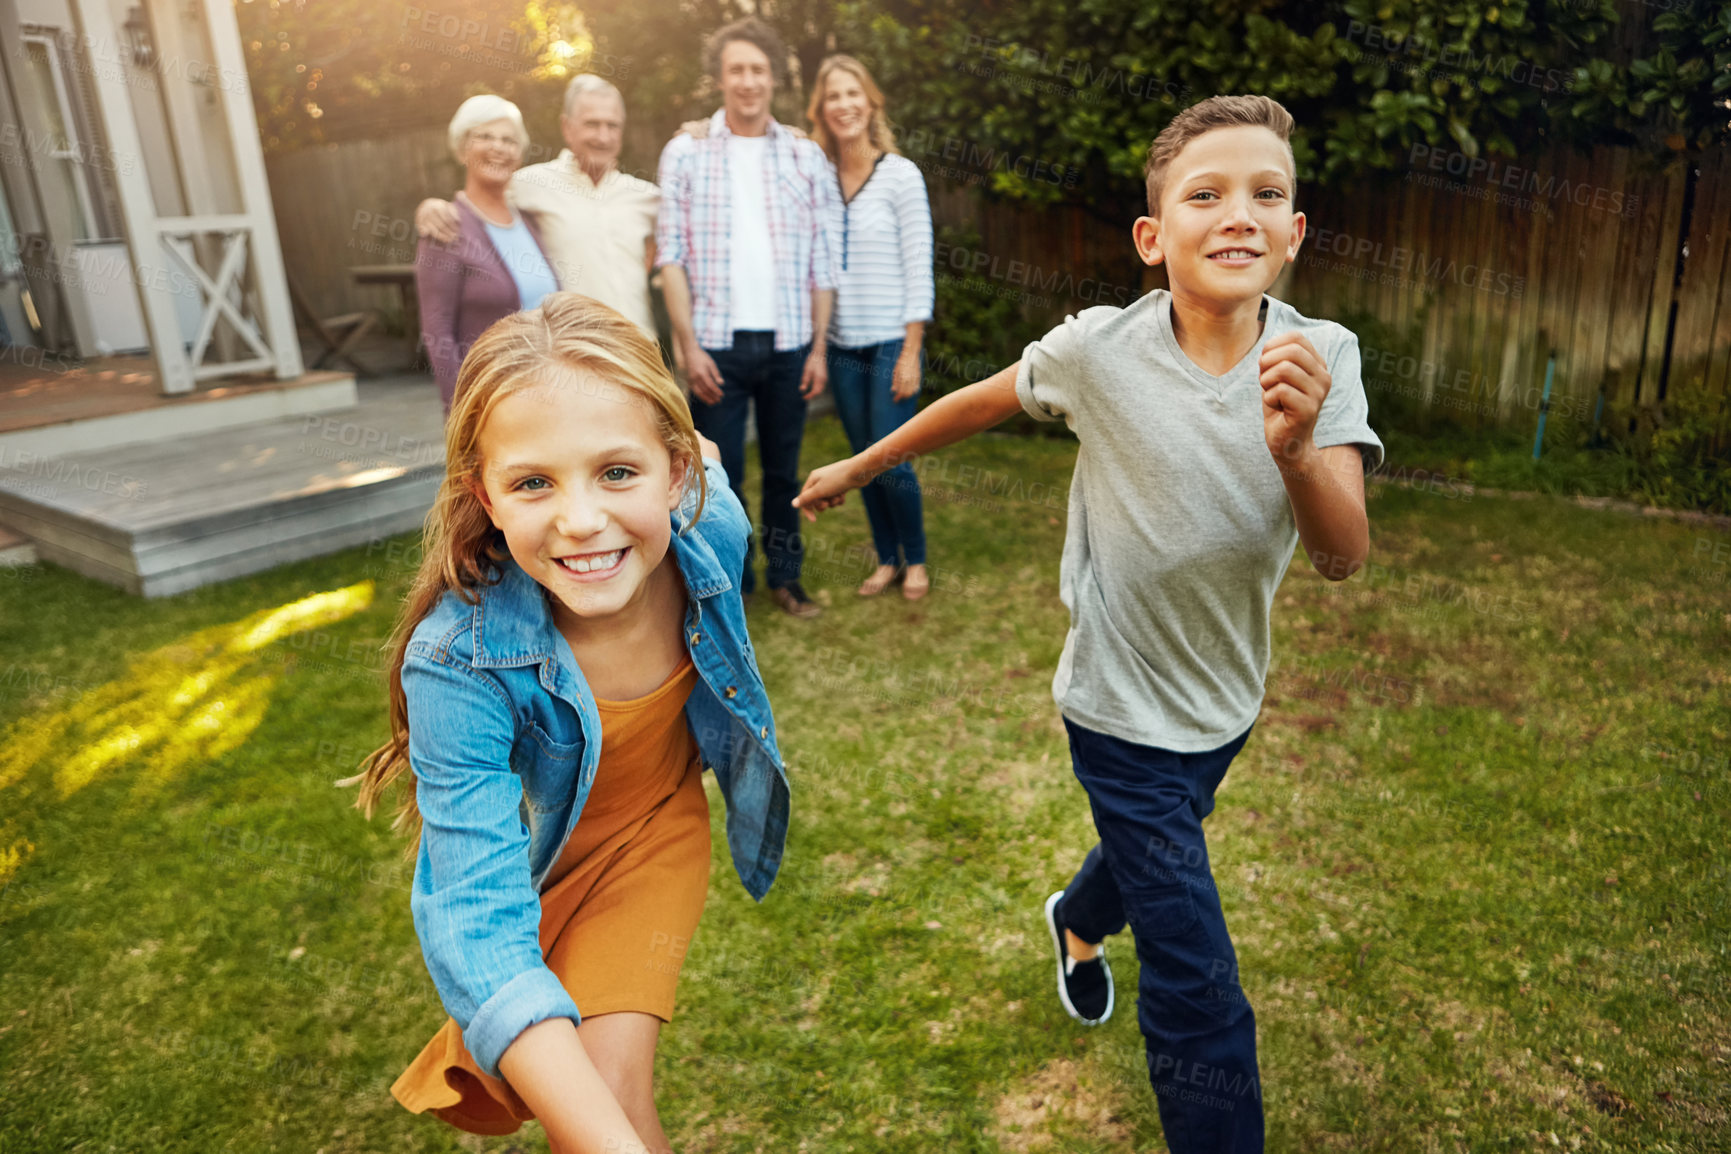 Buy stock photo Shot of a young brother and sister playing togther in the yard with their family in the background